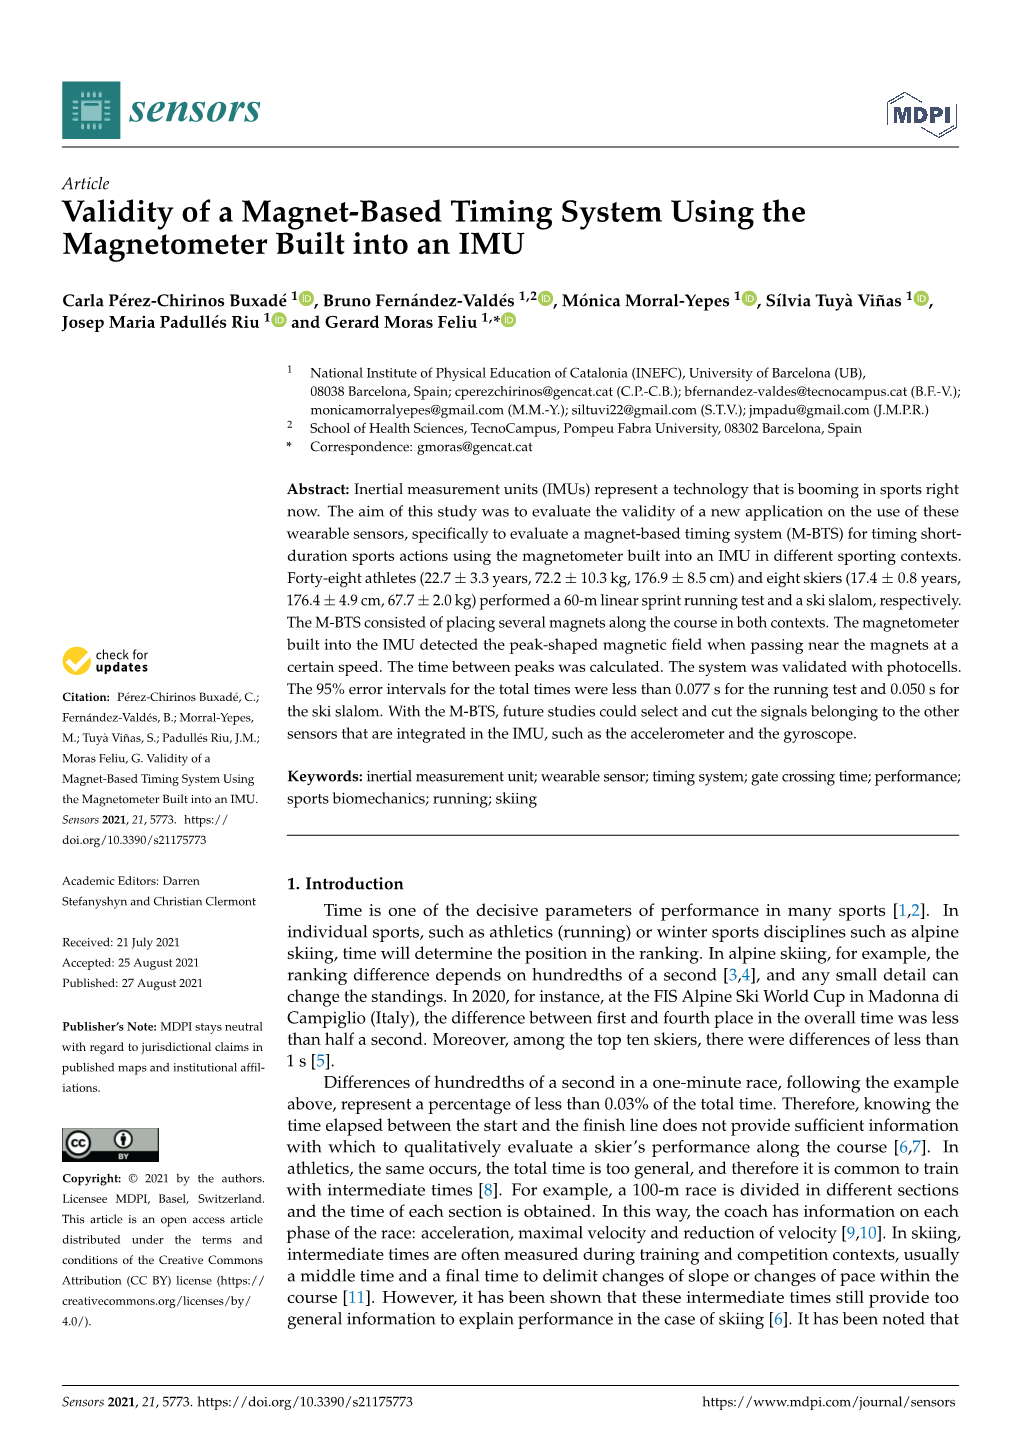 Validity of a Magnet-Based Timing System Using the Magnetometer Built Into an IMU